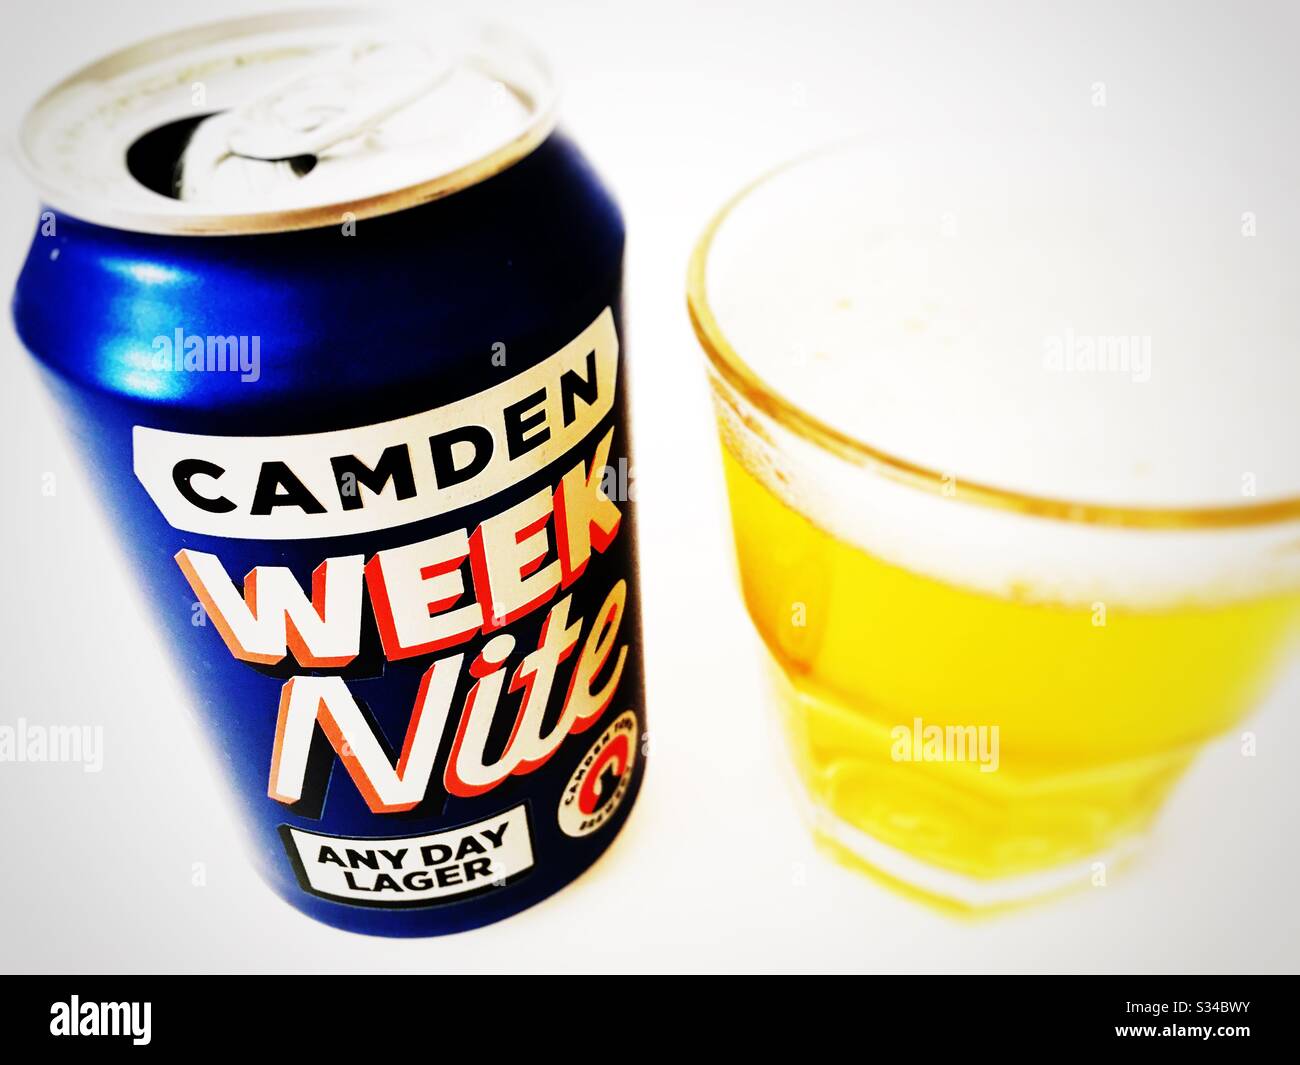 Camden Brewery Week Nite qualsiasi giorno lager Foto Stock